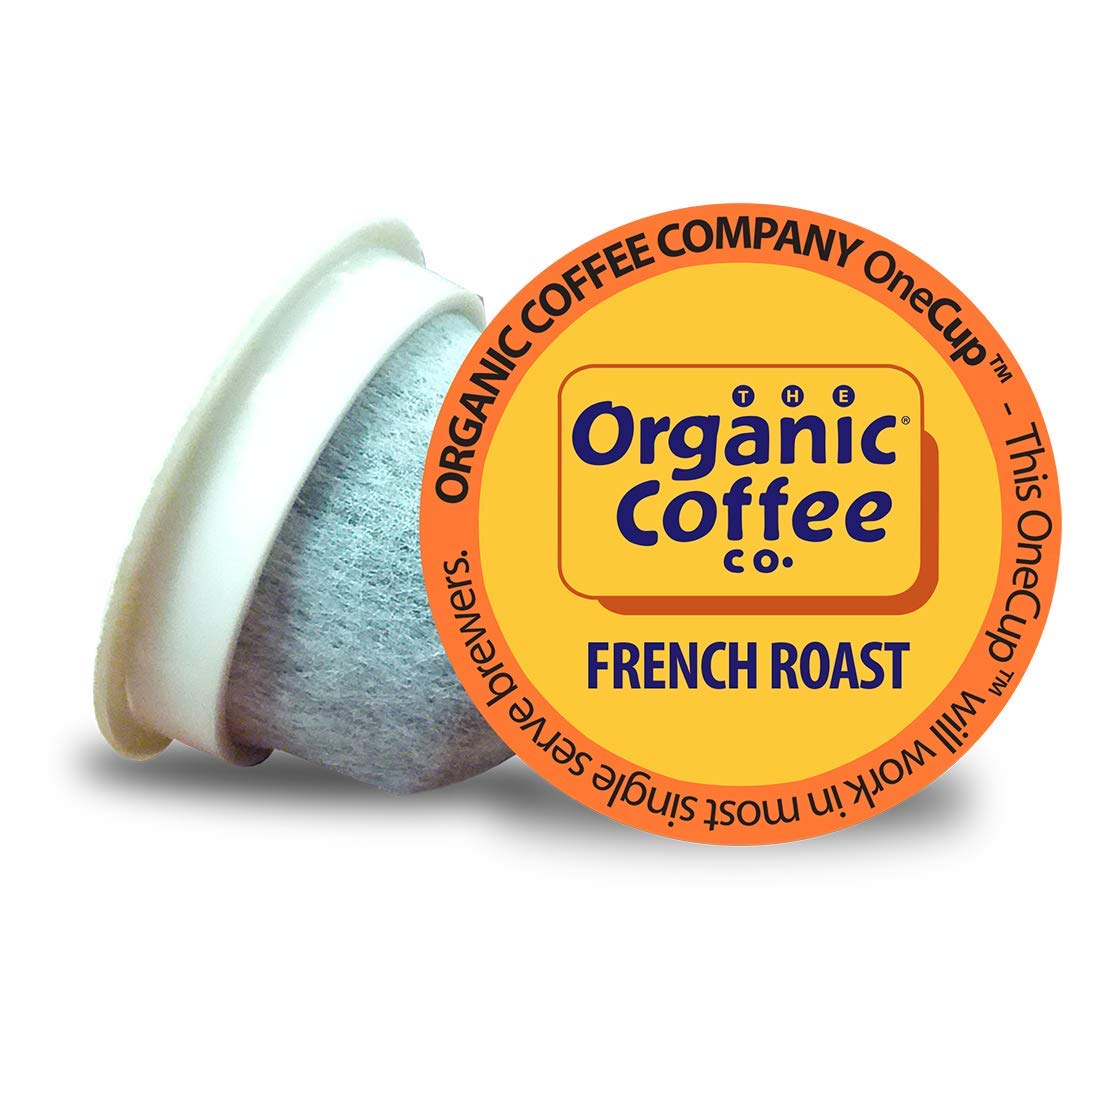 The Organic Coffee Co. Compostable Coffee Pods - French Roast (80 Ct) K Cup Compatible including Keurig 2.0, Dark Roast